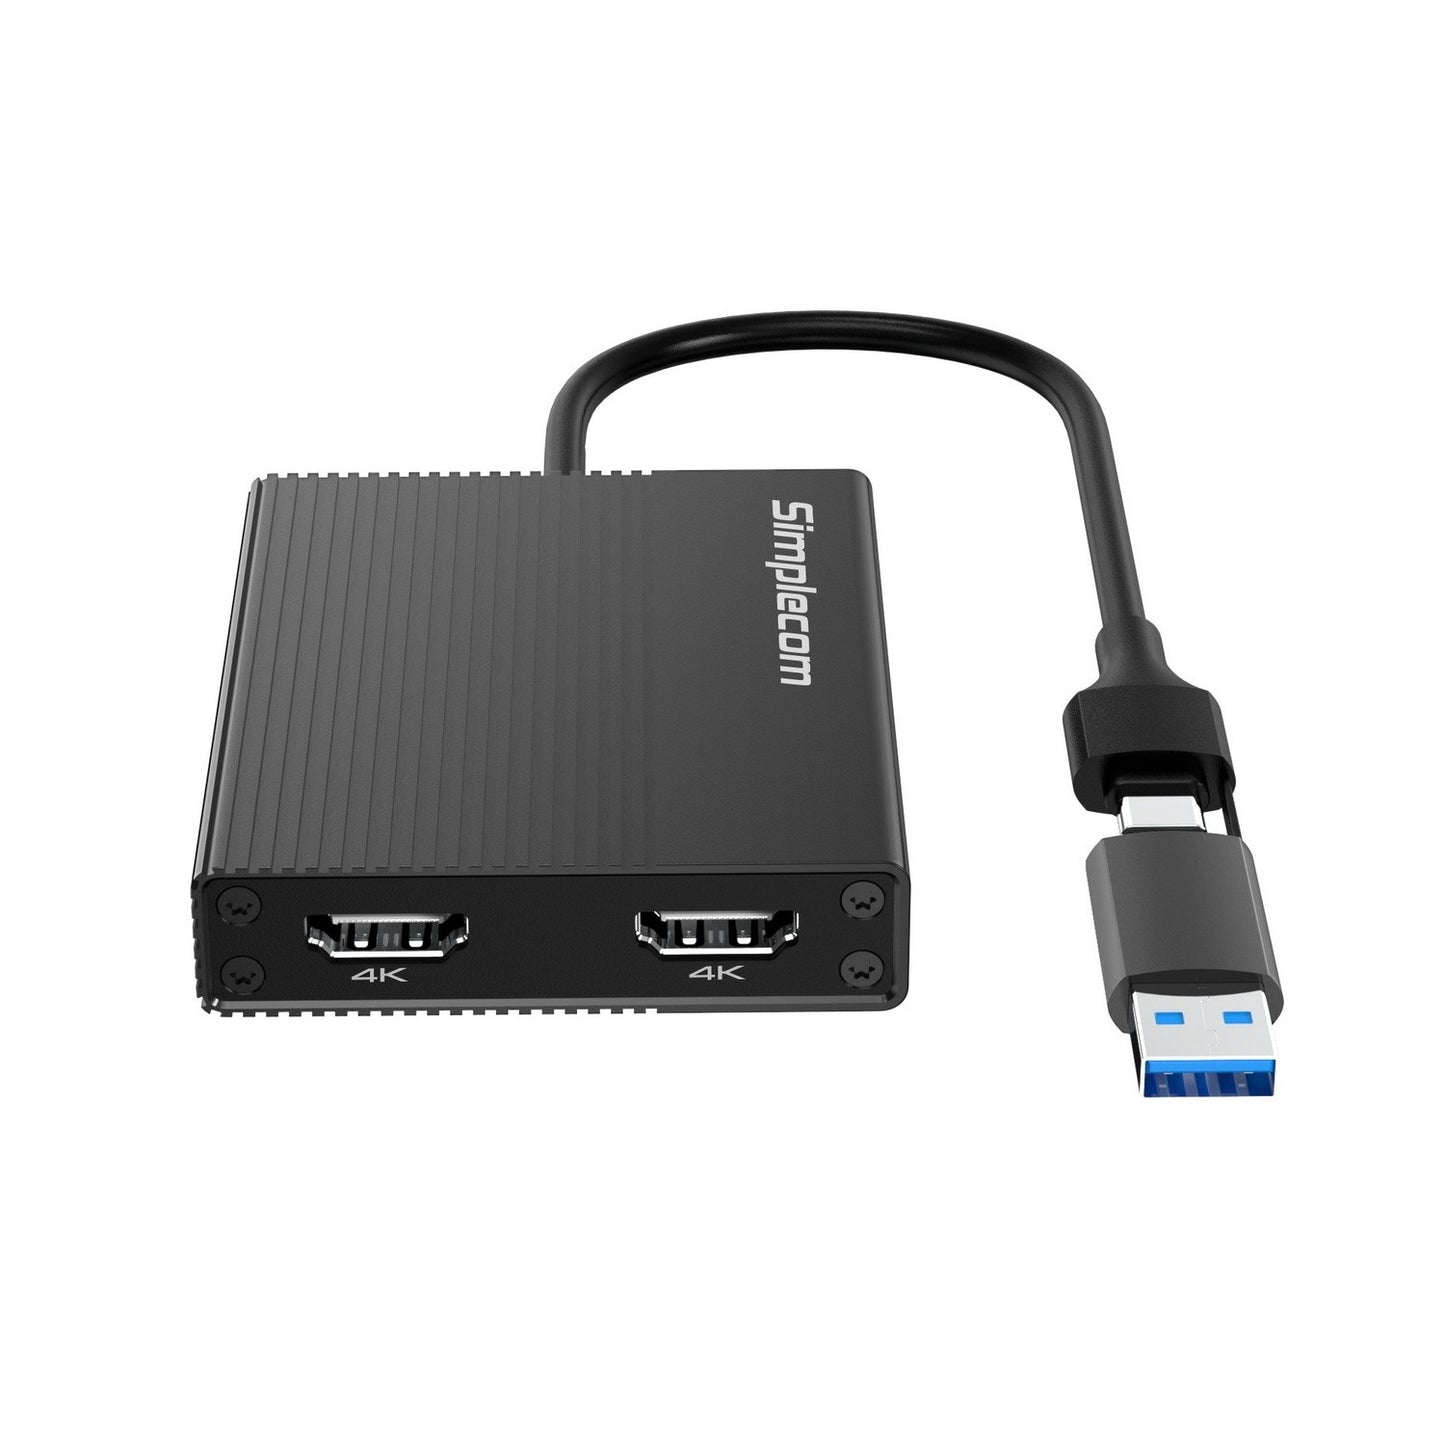 USB 3.0 or USB-C to Dual 4K HDMI Display Adapter